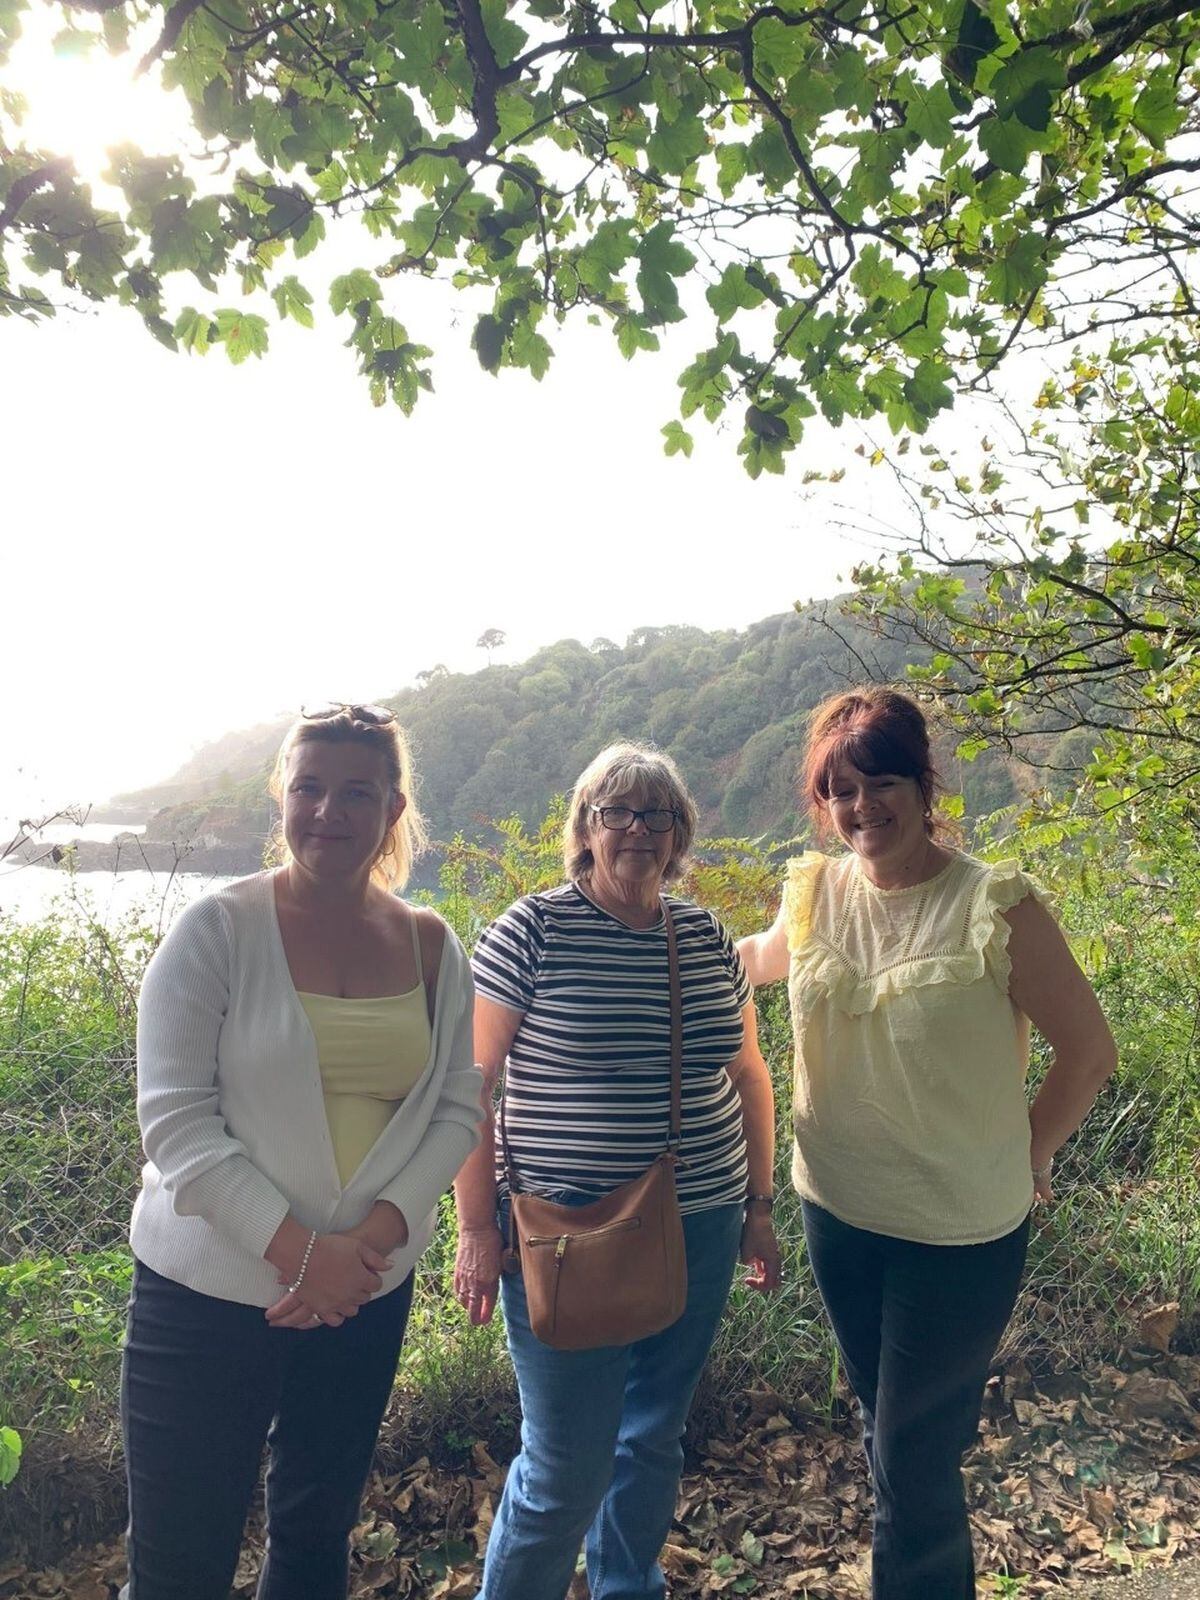 Jennifer Harris, her mum Jane Collins and sister Sarah Cleall also enjoyed a sunnier and less eventful stroll on the island's cliff paths during their long weekend in Guernsey. (31476091)